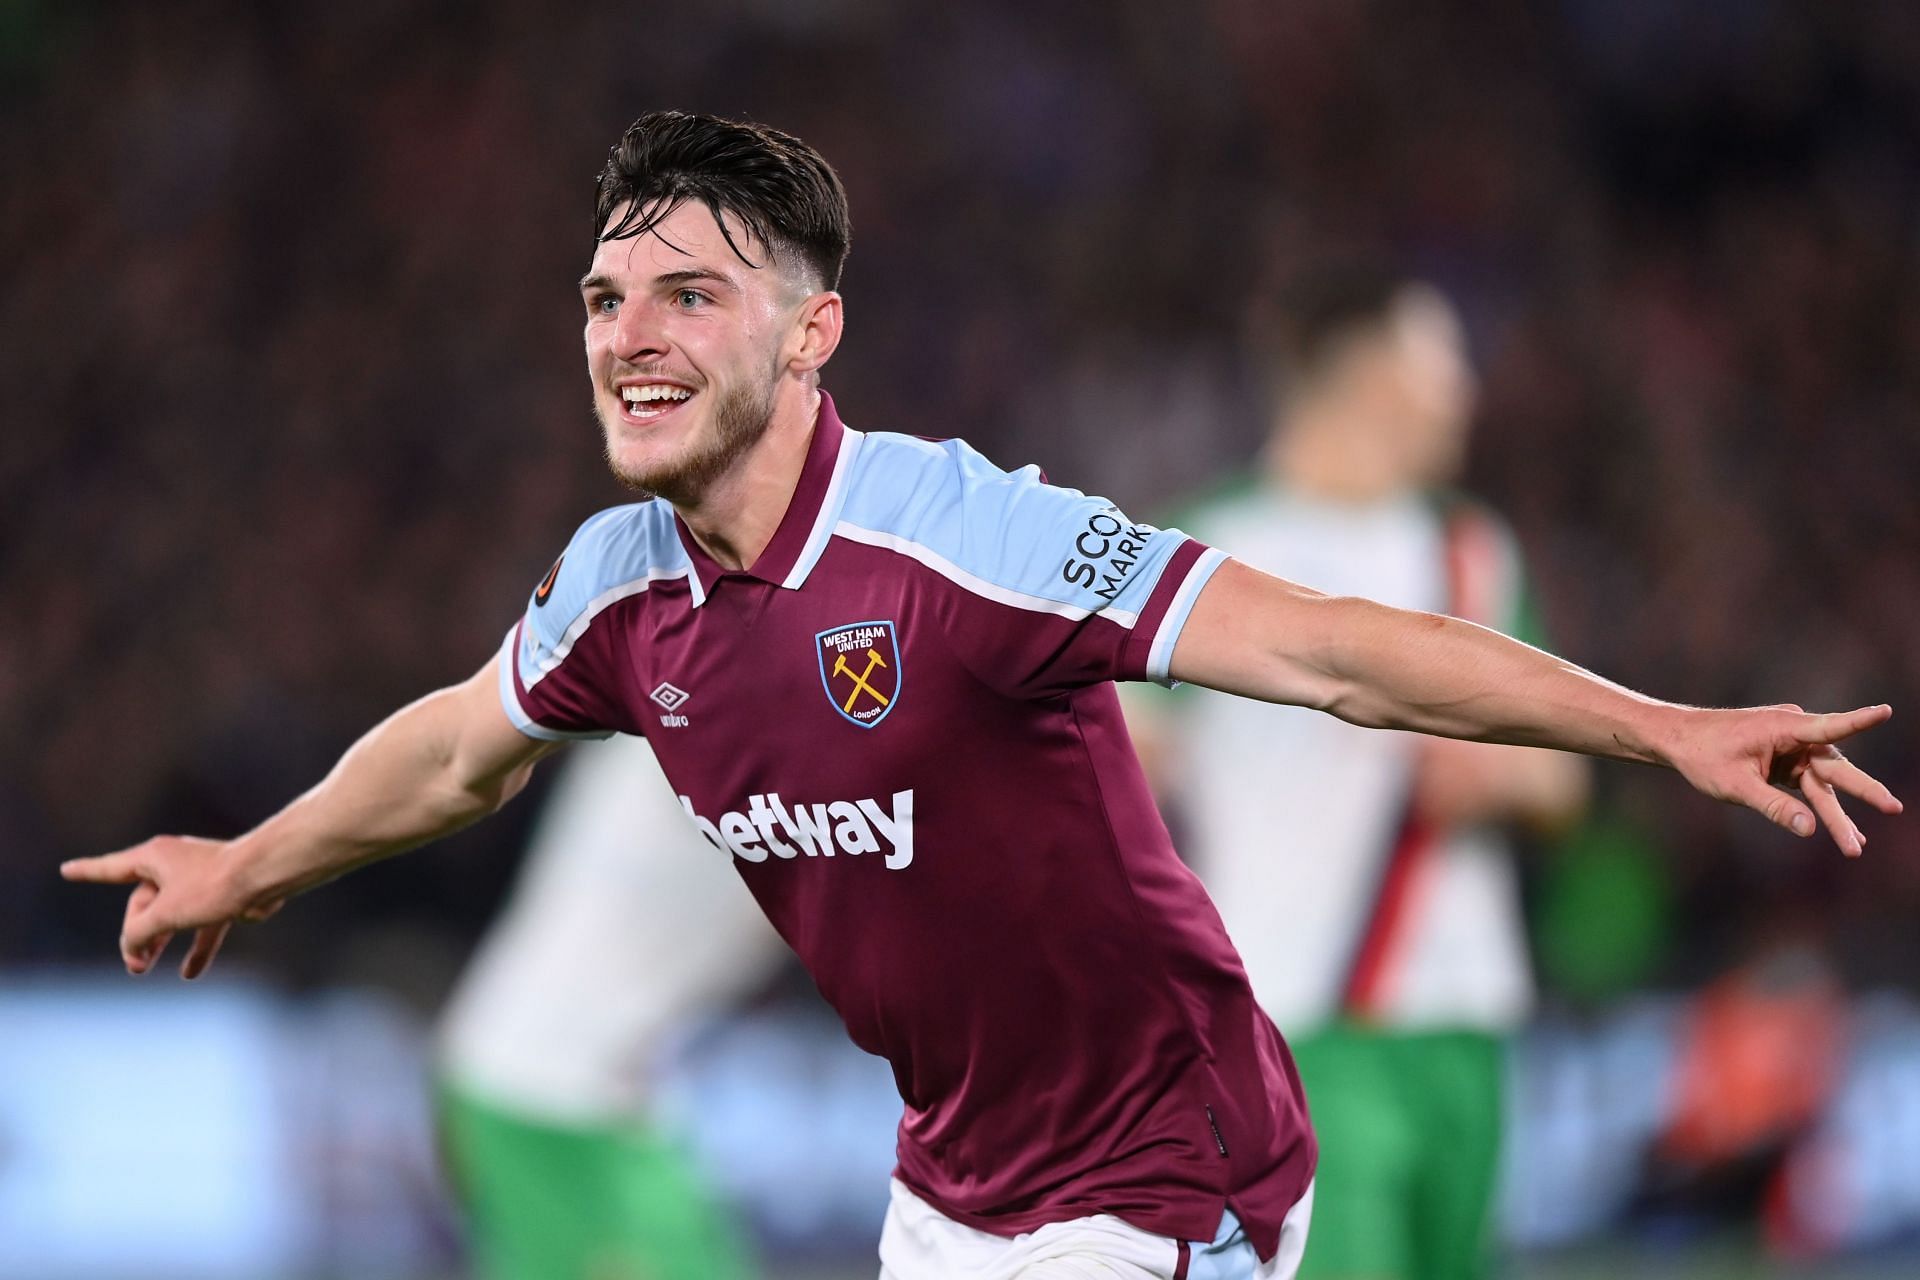 Rice looks set to depart West Ham in the near future